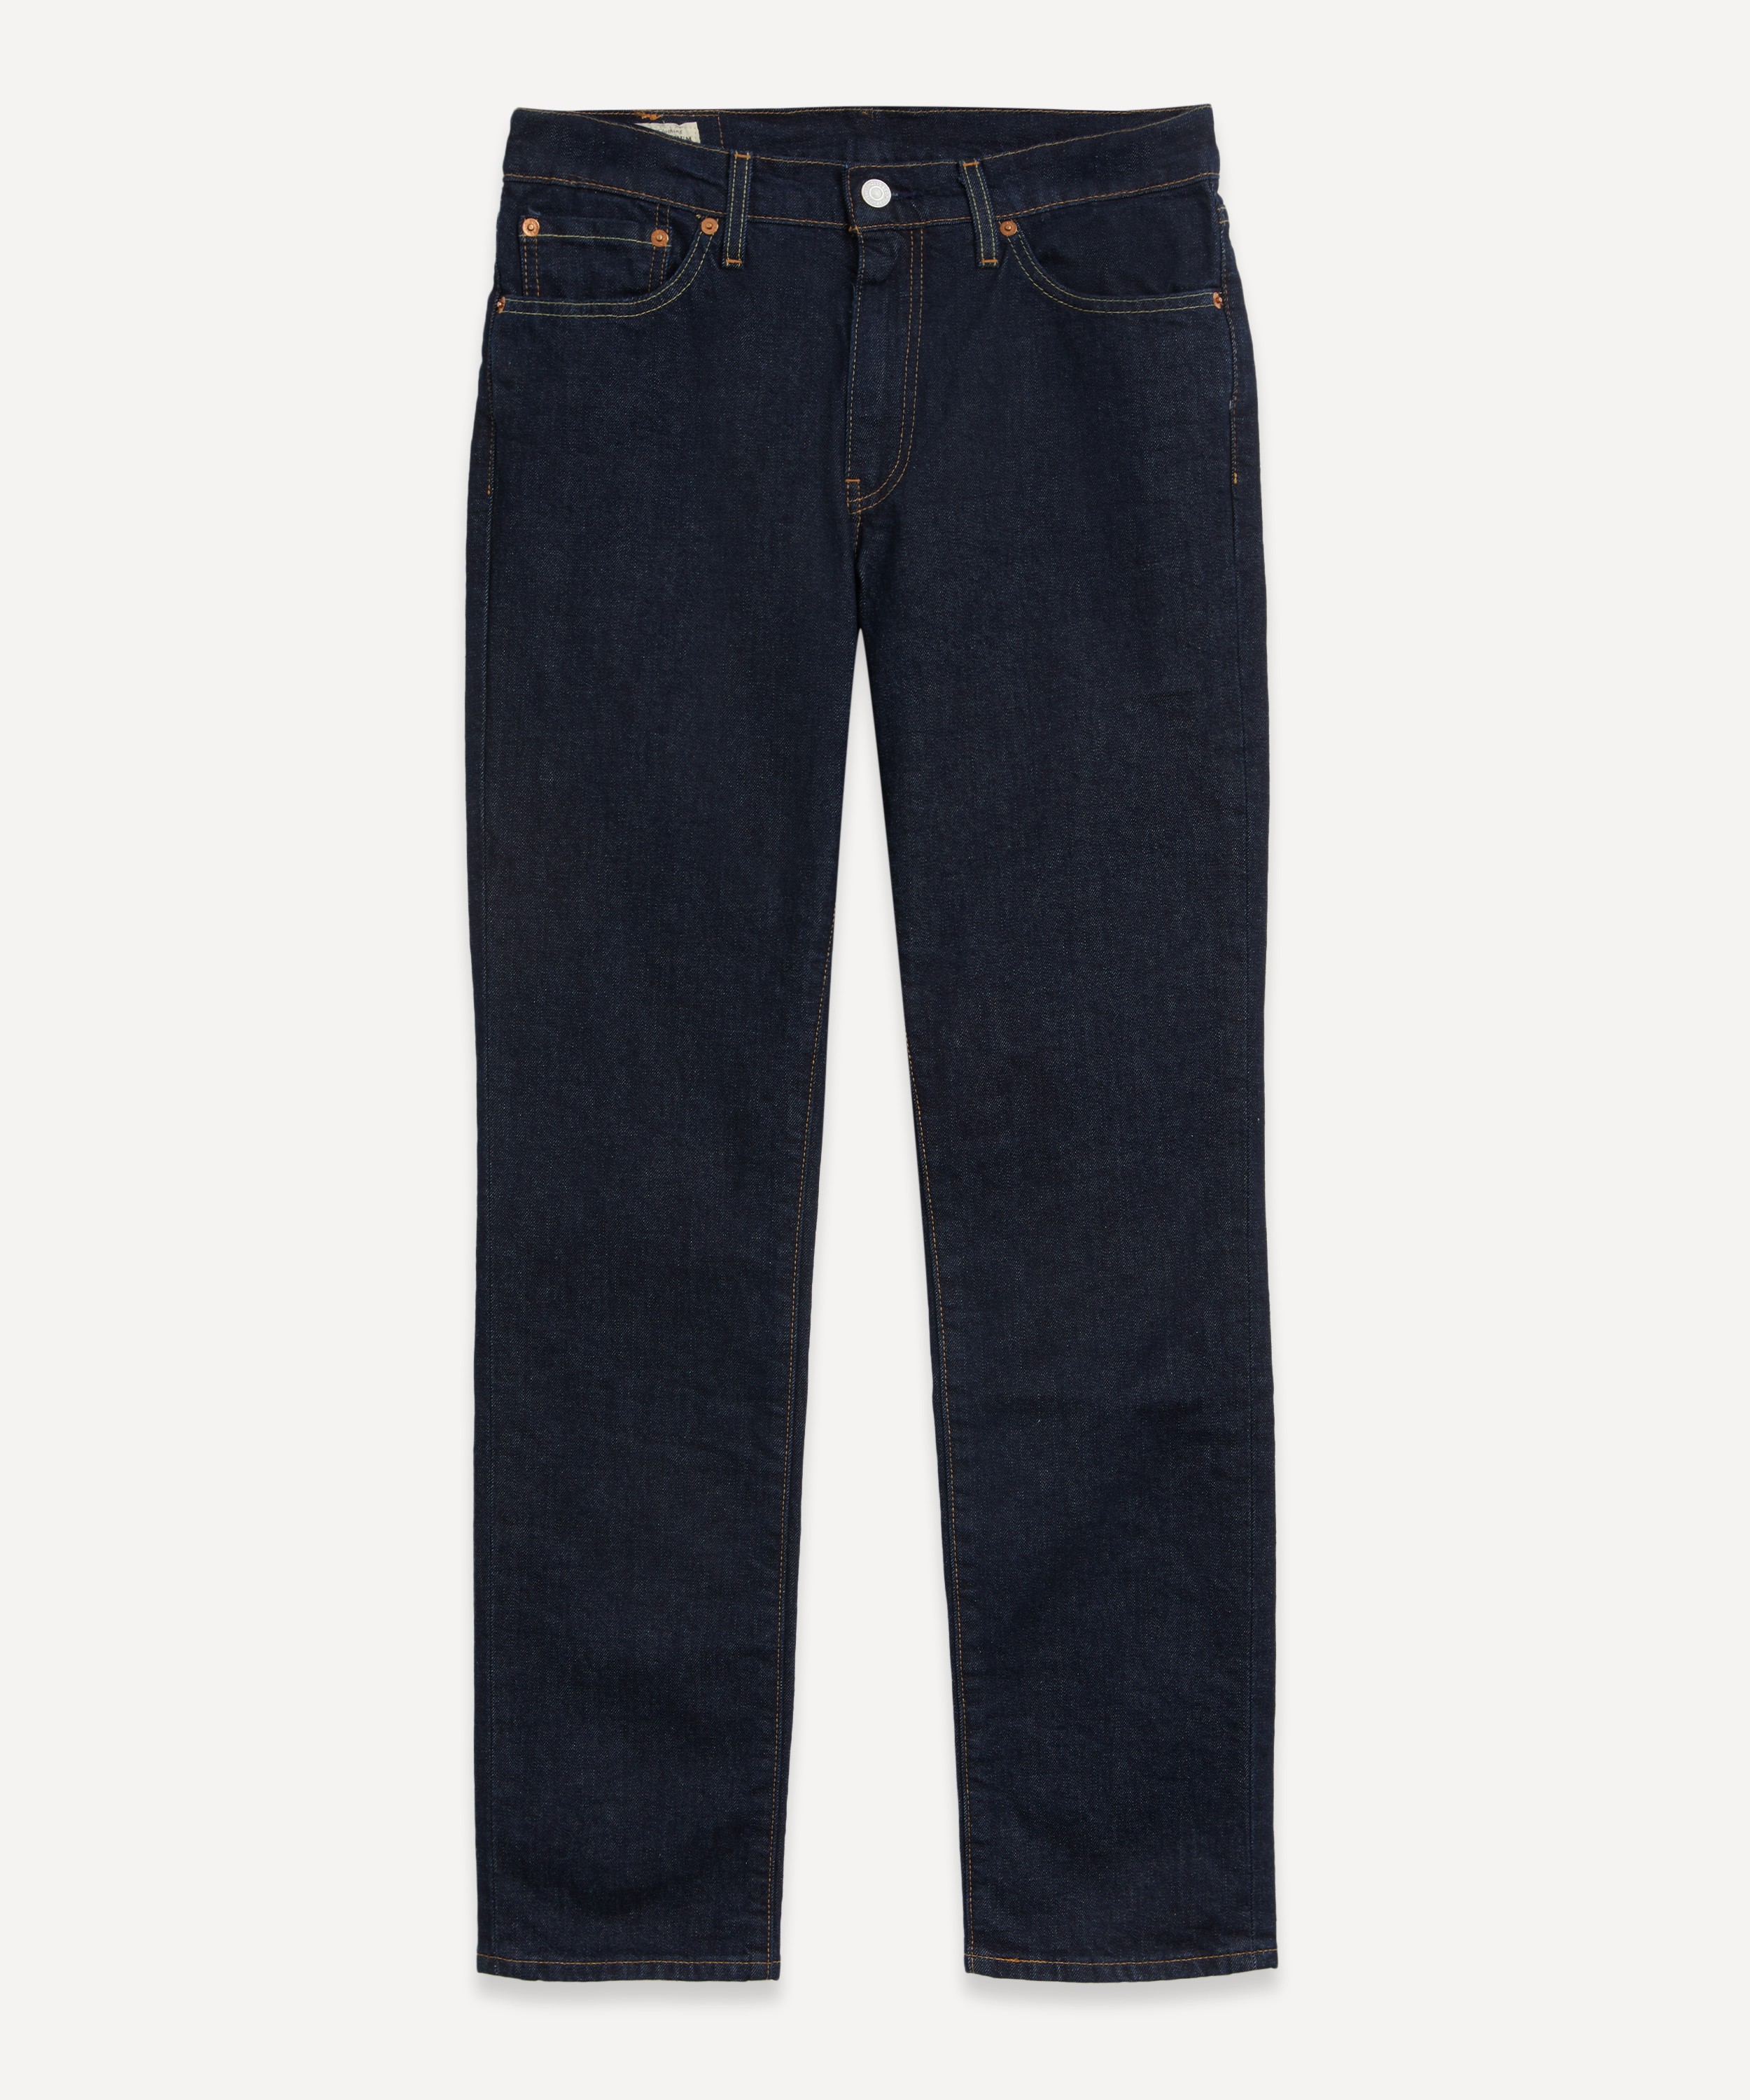 Levi's Made & Crafted - 511 Slim Rock Cod Jeans